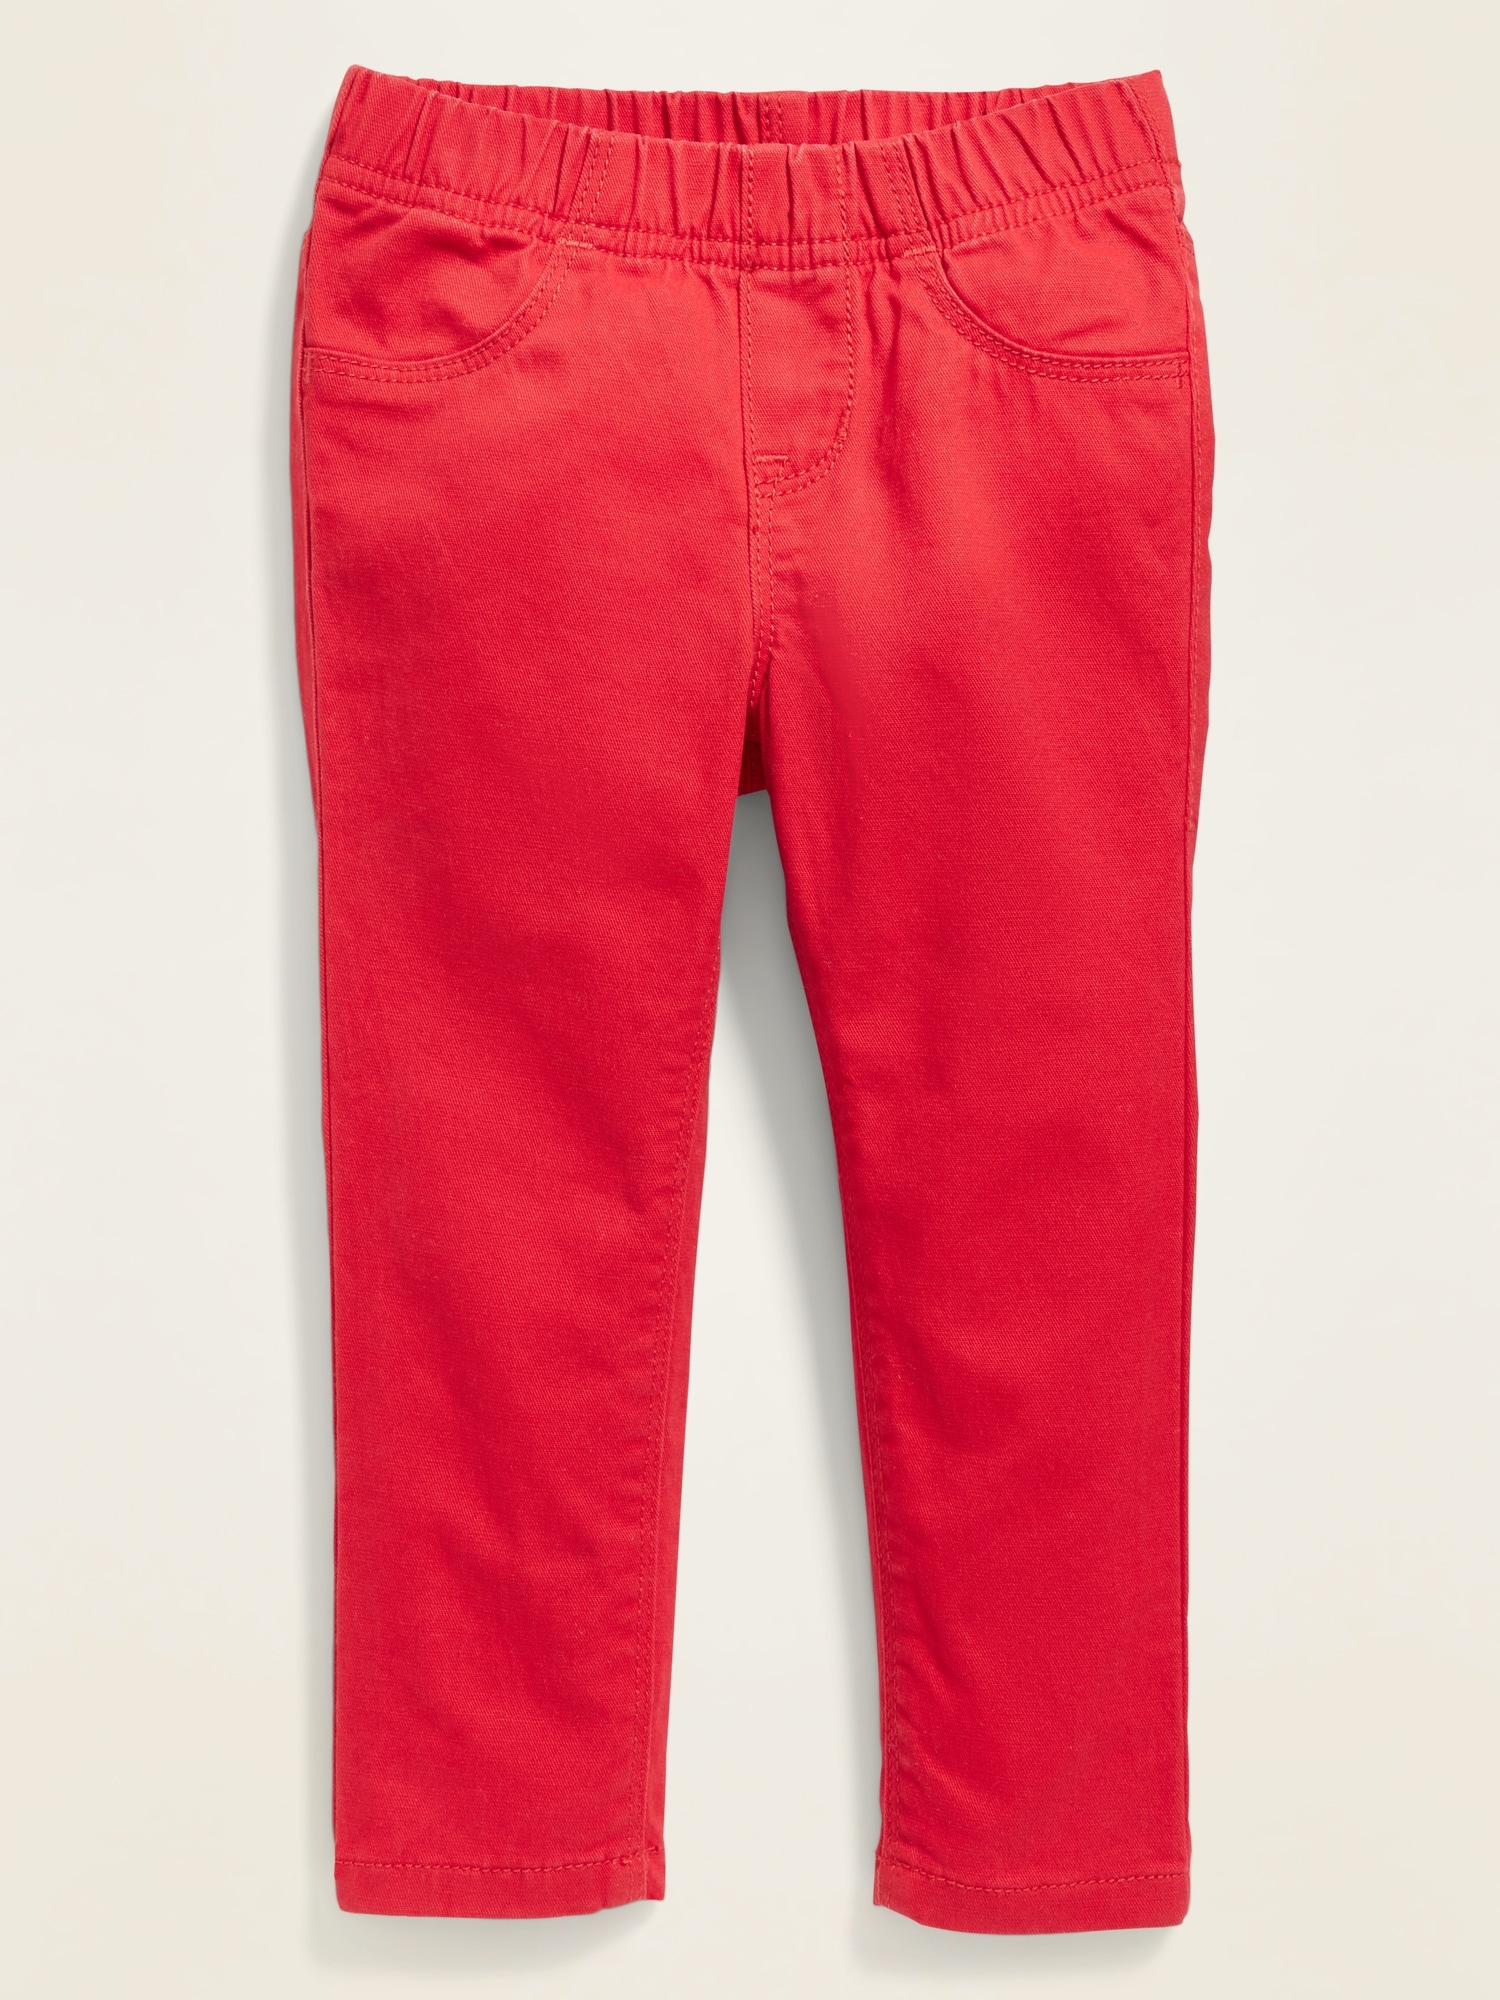 red jeggings old navy